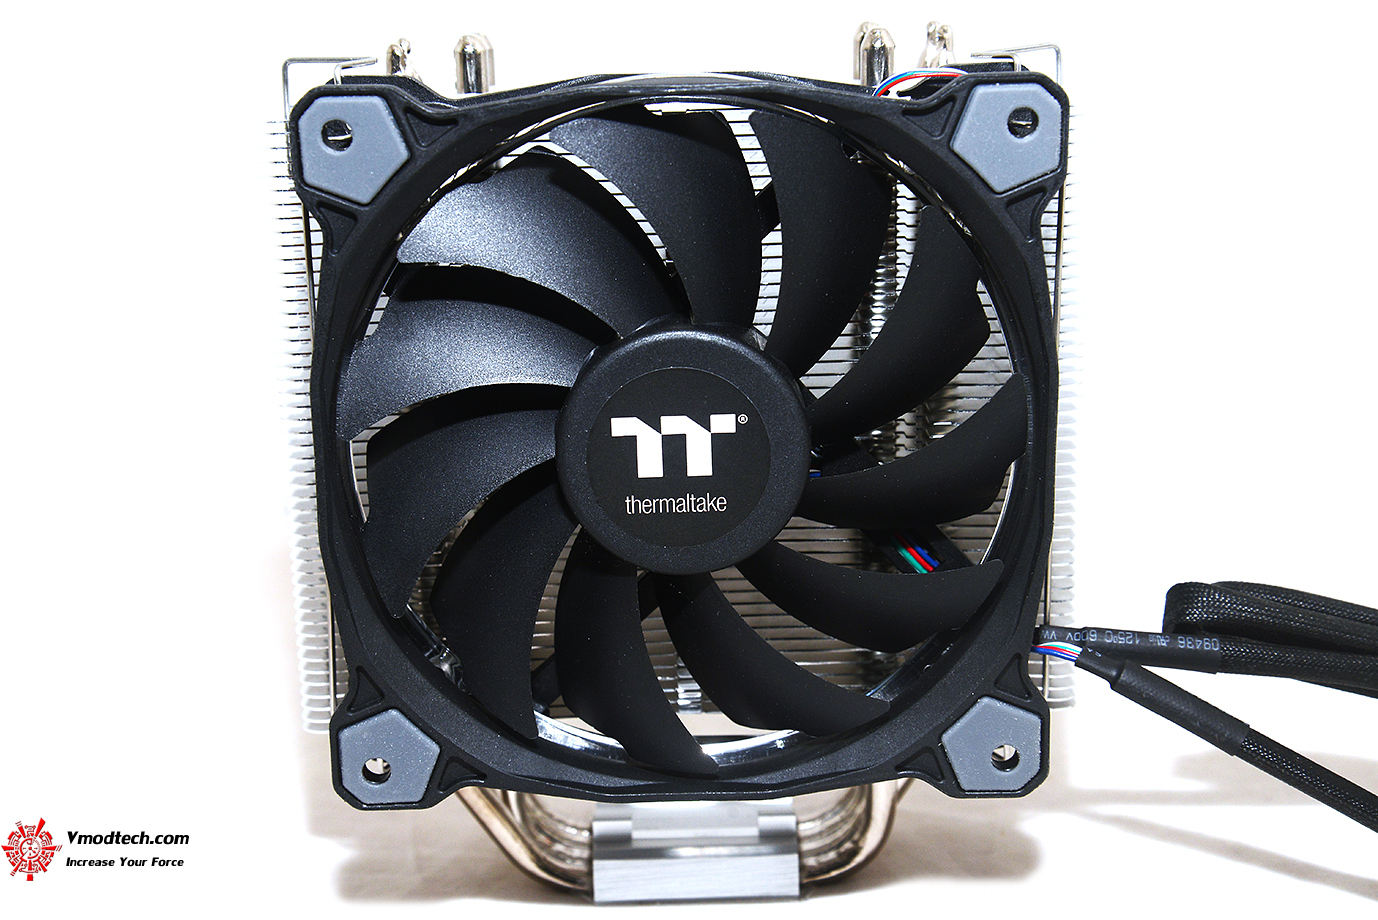 dsc 5353 Thermaltake Riing Silent 12 RGB Sync Edition CPU Cooler Review